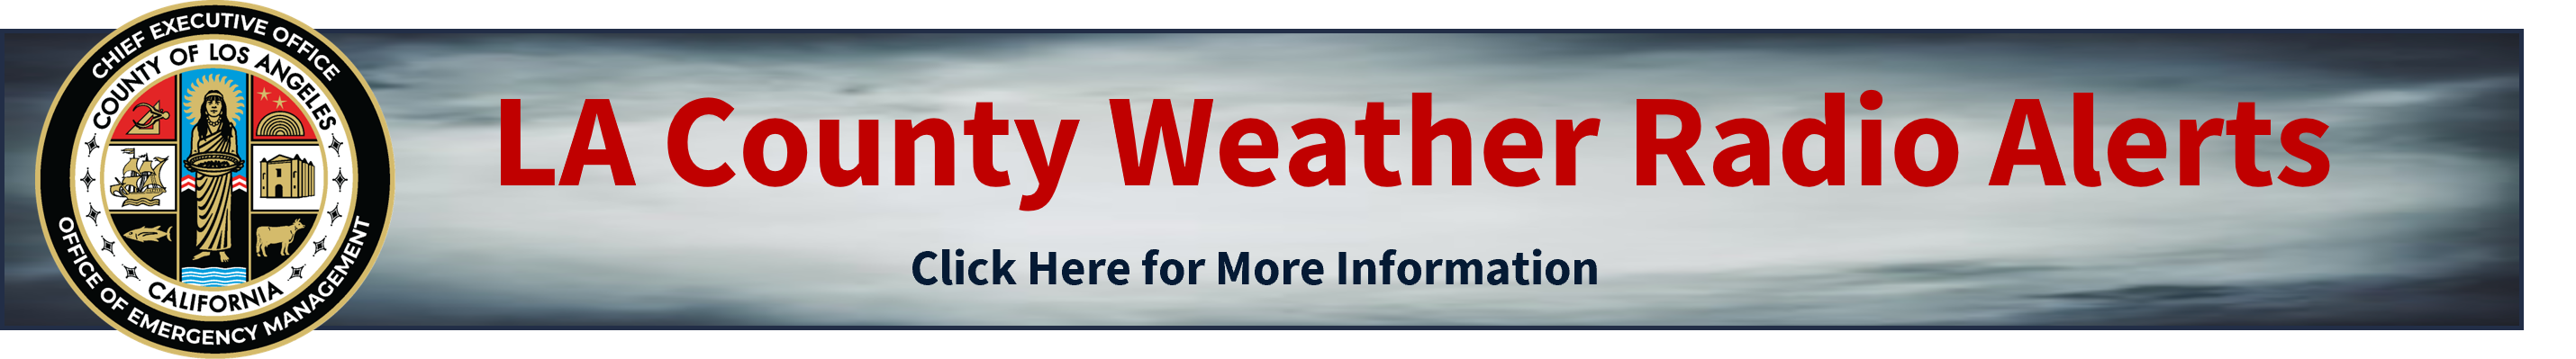 Clickable banner that includes a text title of "LA County Weather Radio Alerts" and instructs the view to "click for more information.